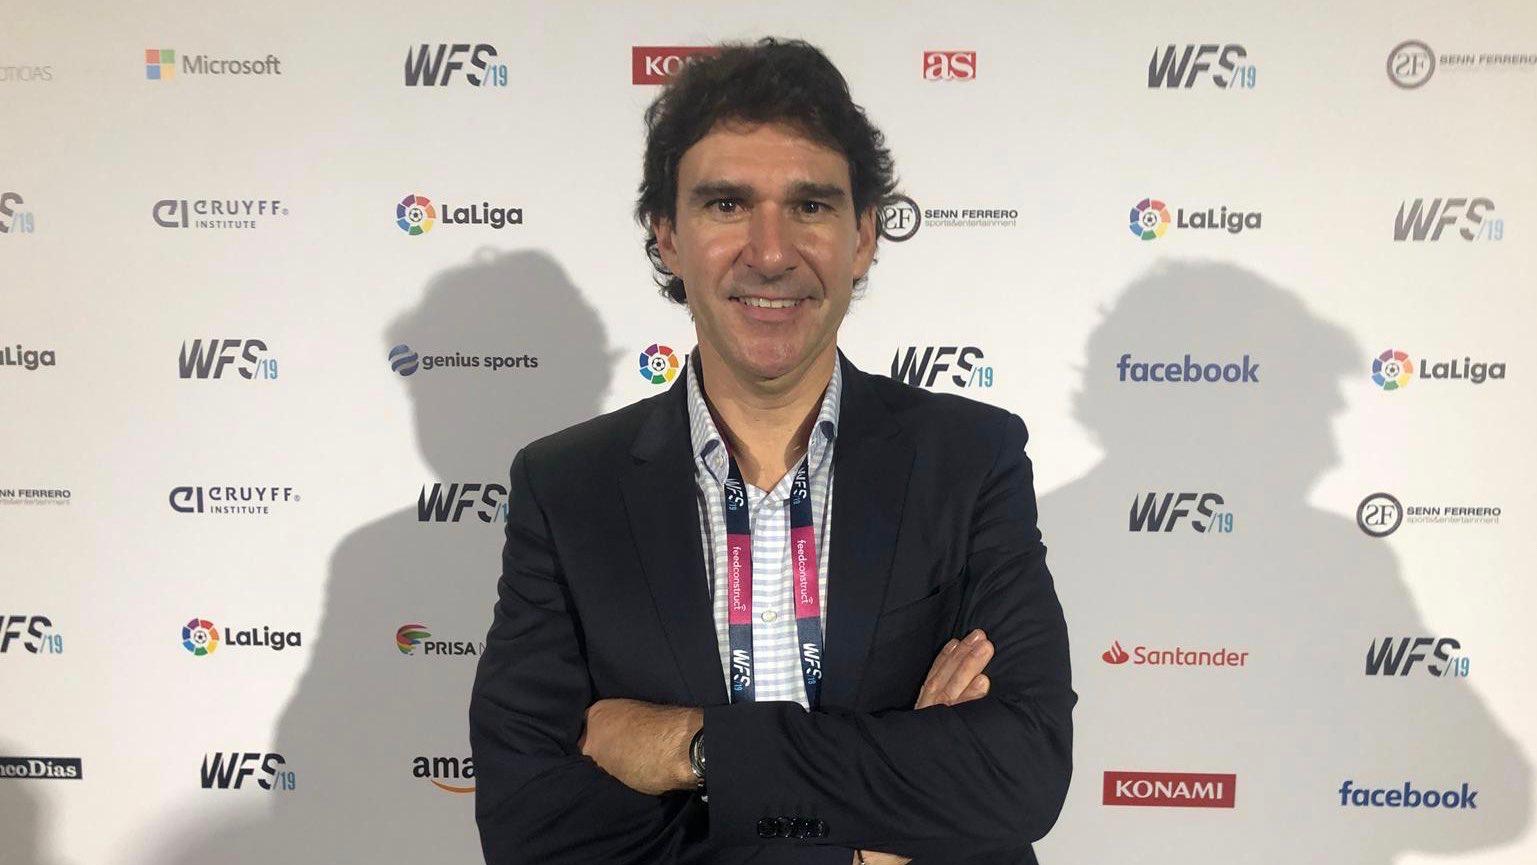 Karanka talks about his future & reviews the latest from within the game at the World Football Summit